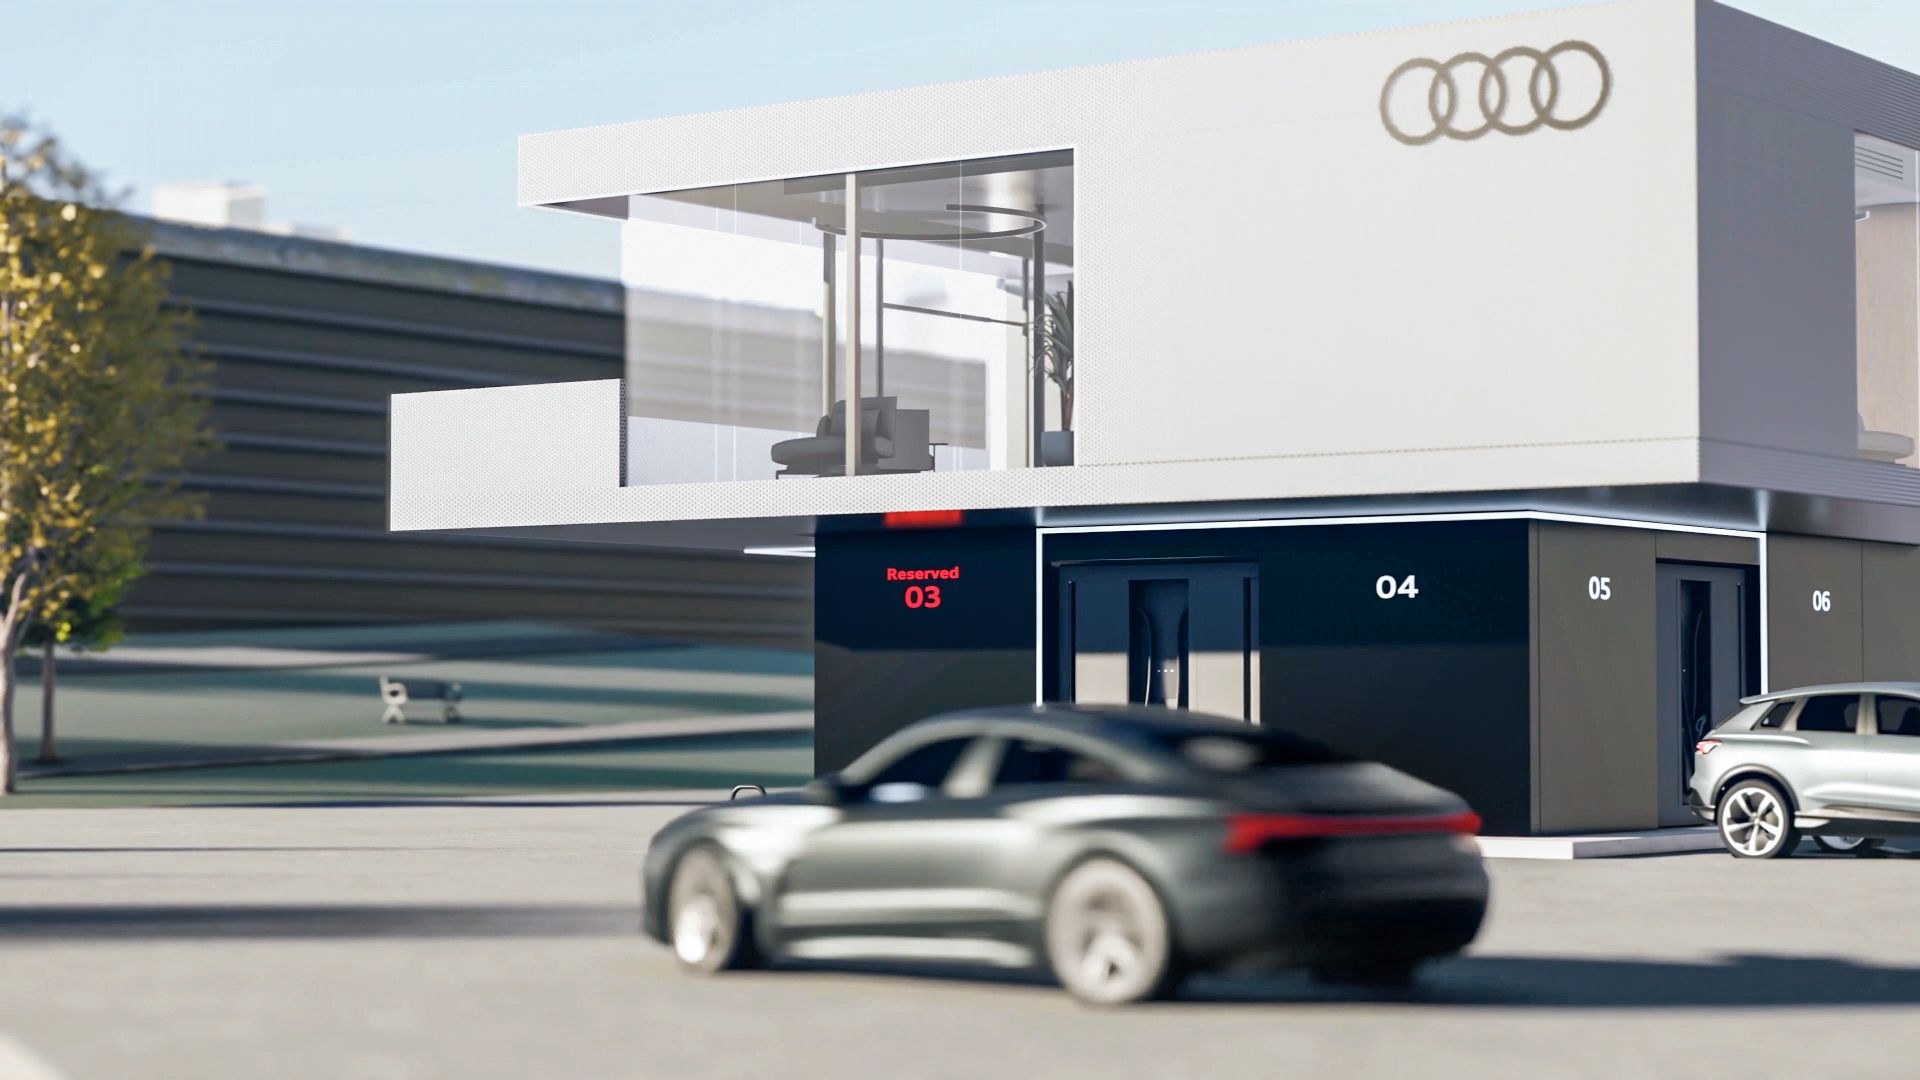 An Audi car stands in front of the Audi charging hub.